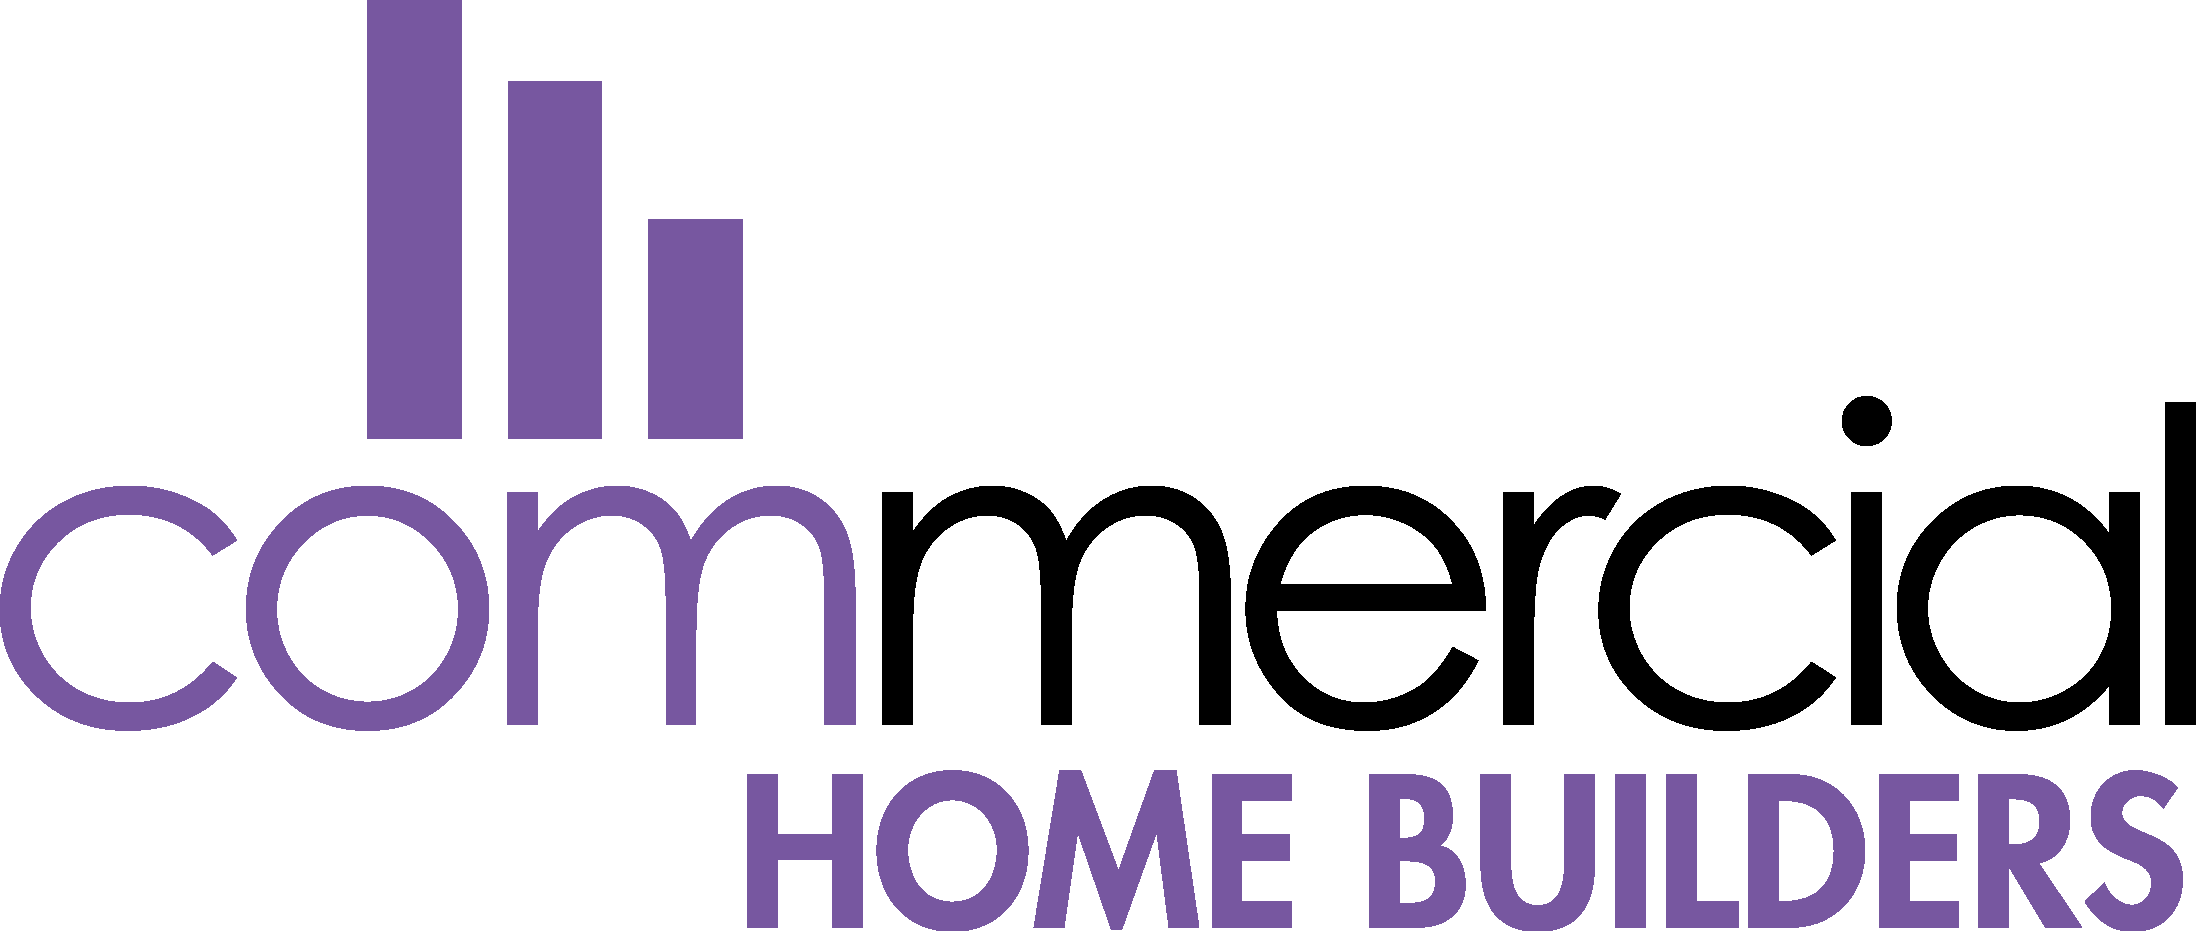 commercial_home_builders_v1 [Converted].png